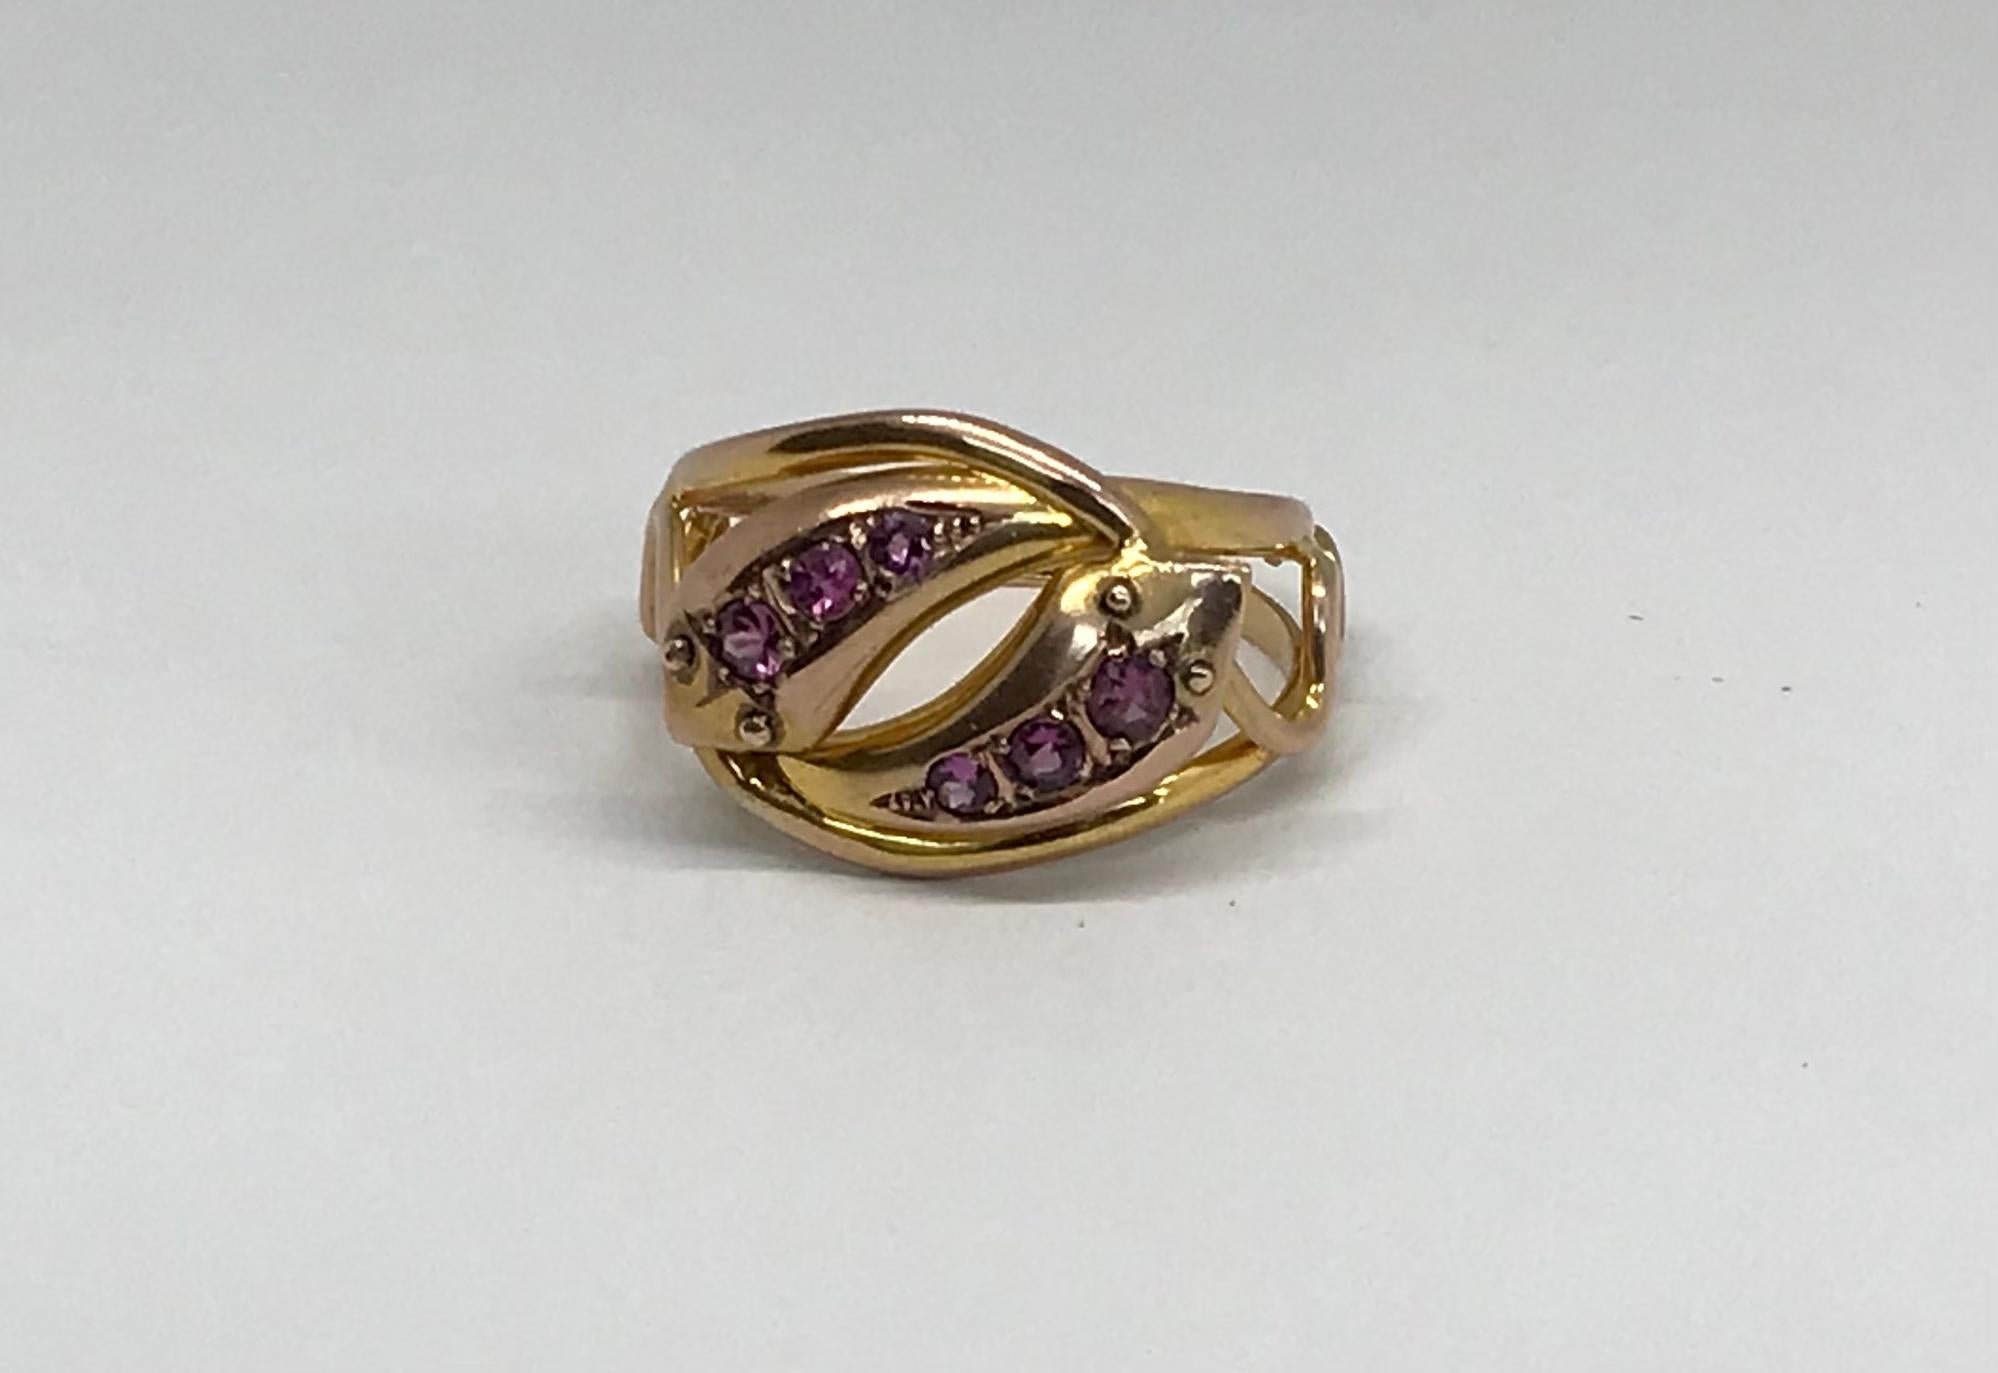  Substantial 9k double headed snake ring featuring pink sapphire laden tops, carved gold eyes and a modern looking chic open work gold band. The ring is hallmarked 